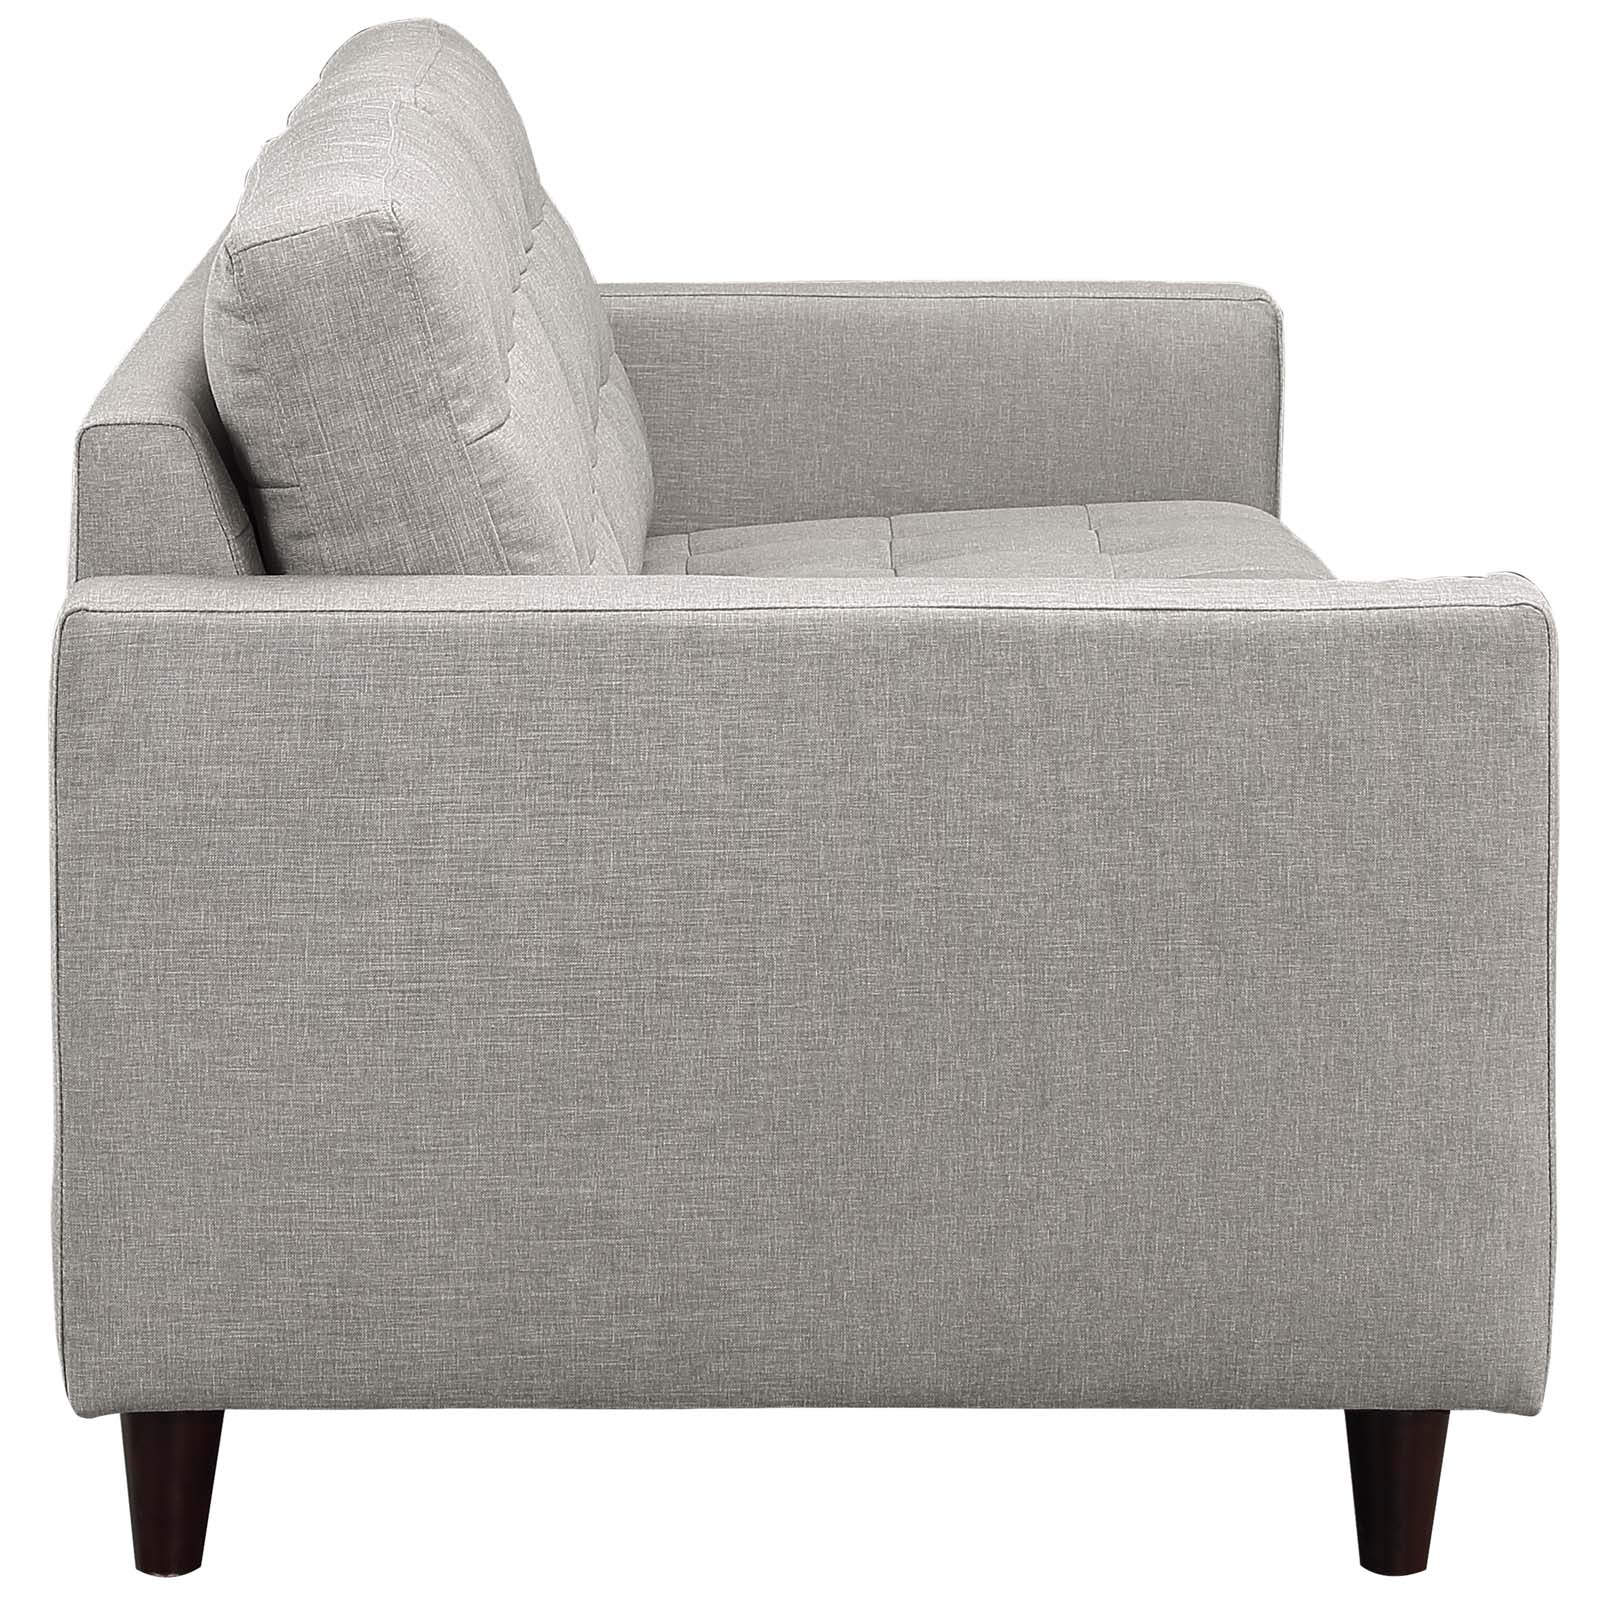 Modway Sofas & Couches - Empress Upholstered Fabric Sofa Light Gray